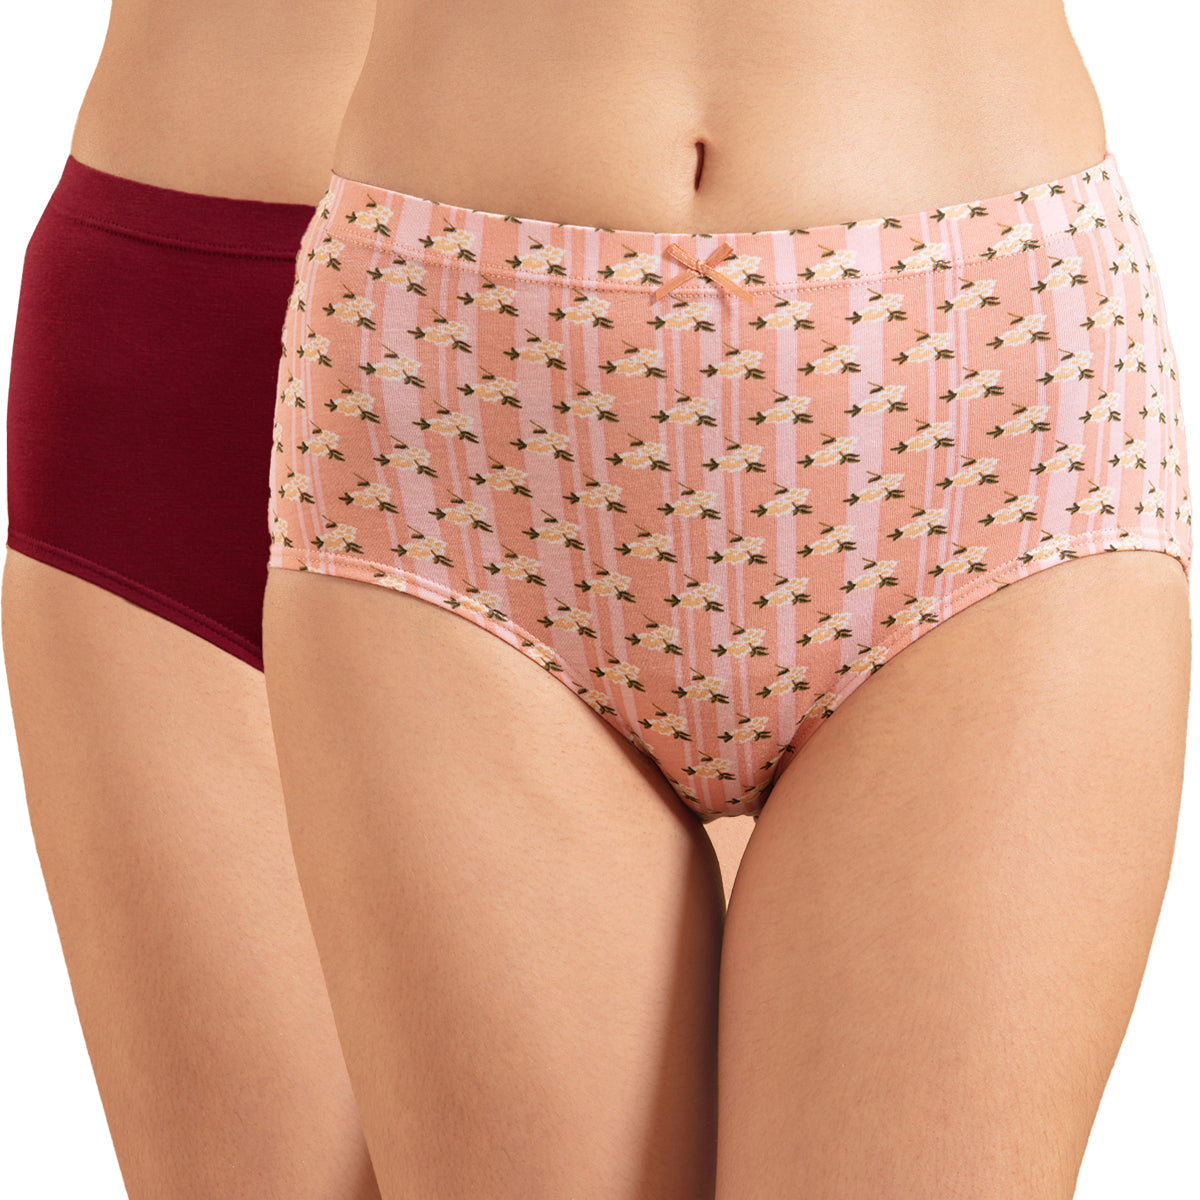 NYKD X Masaba Pack Of 2 Cotton Full Brief with Anti odor-NYP015-Stripe flower AOP, Cabernet